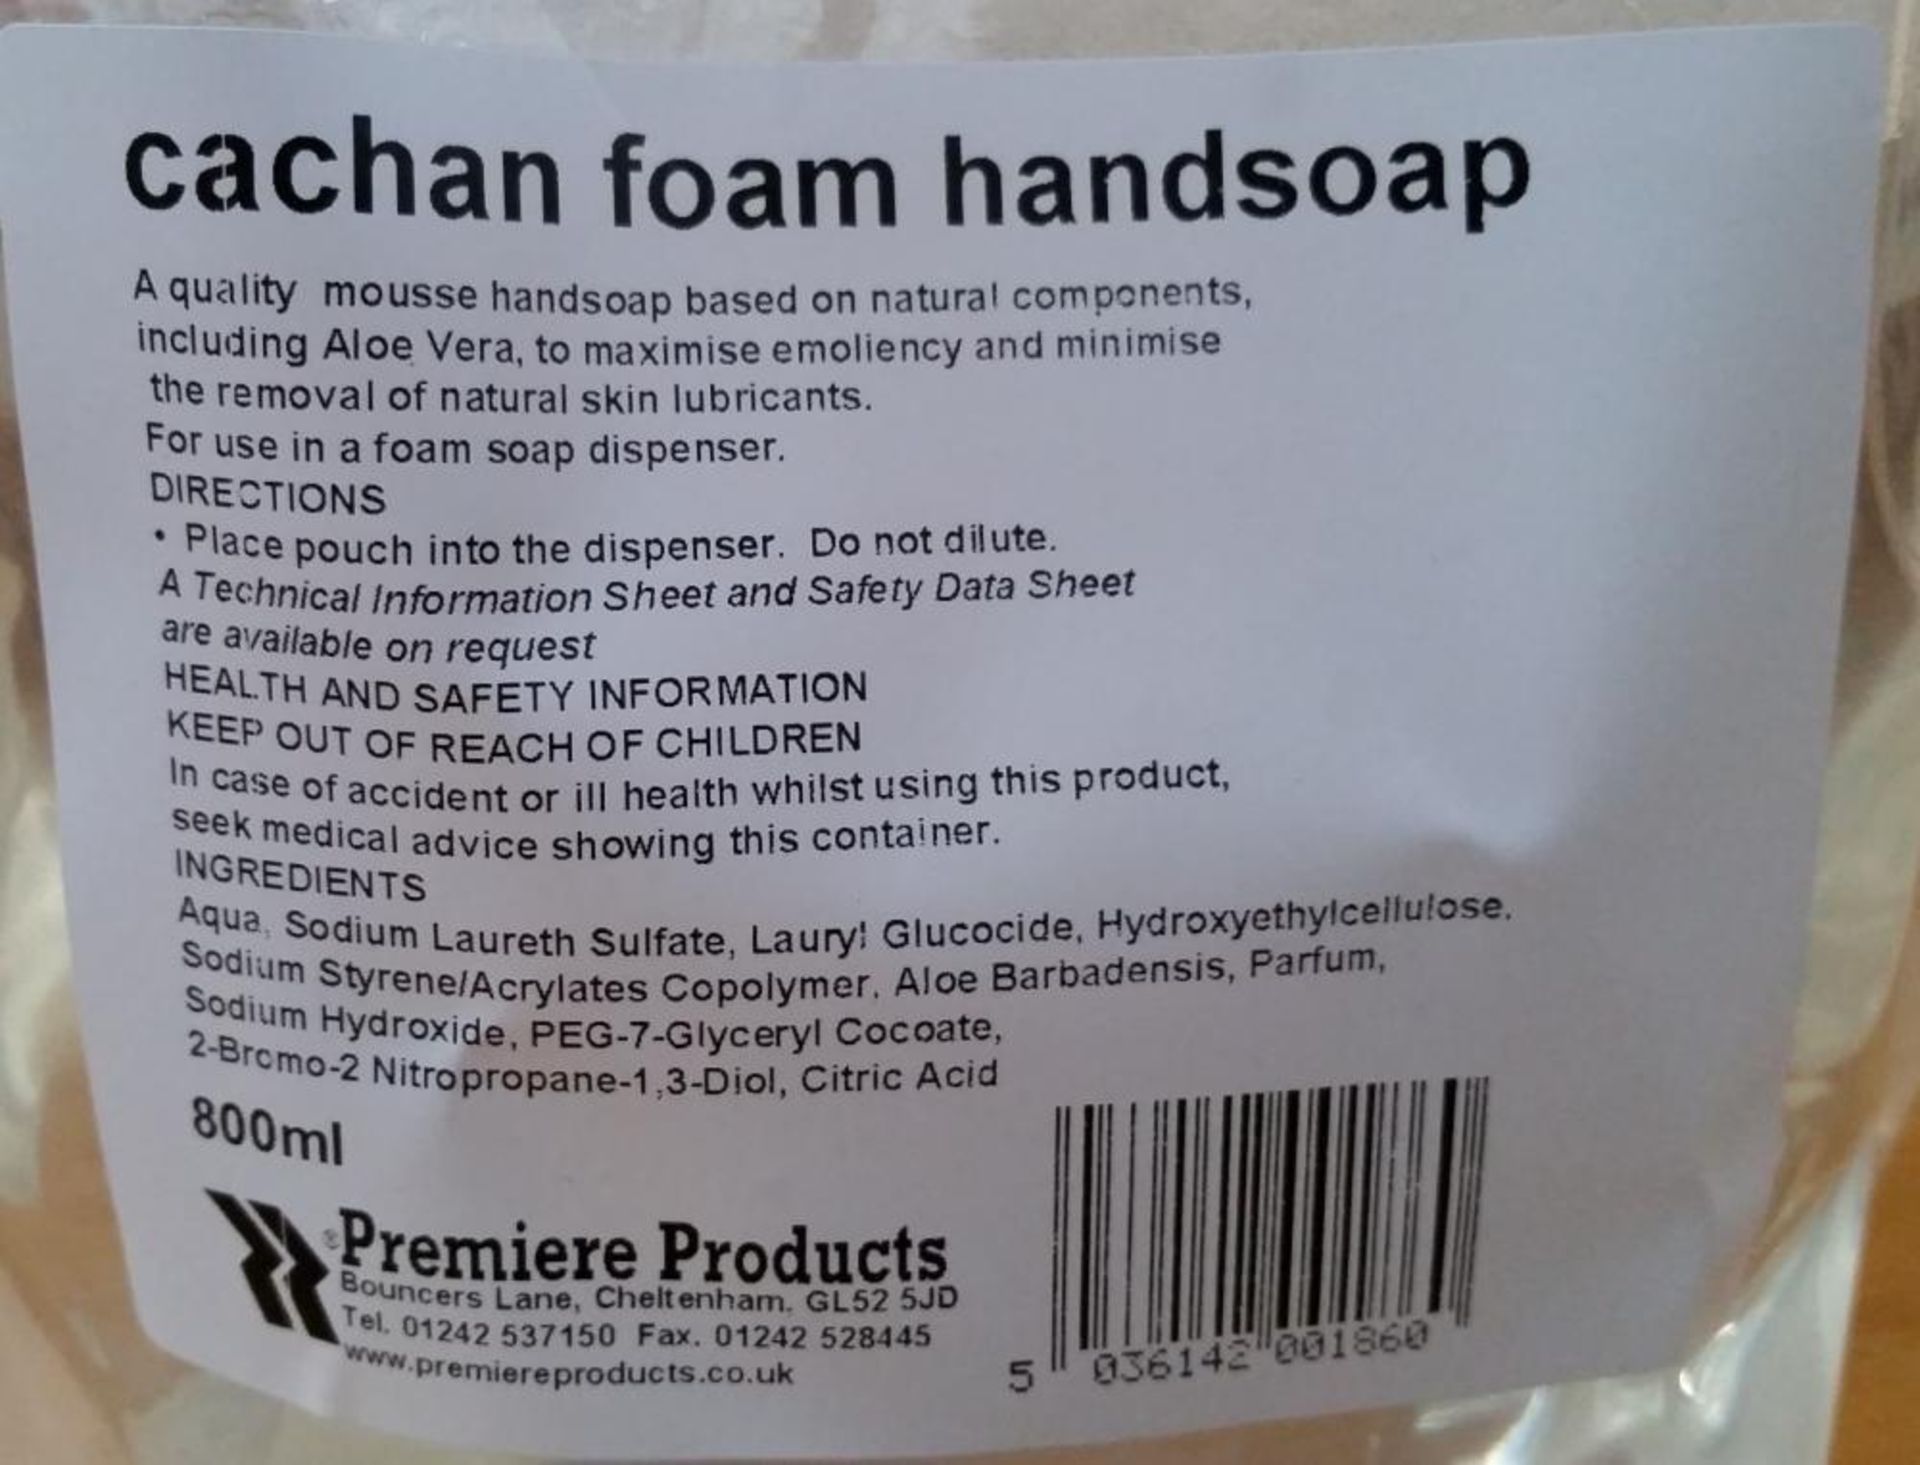 4 x Cachan Foam 800ml Handwash - Suitable For Foaming Dispnesers - Expiry December 2018 - New Boxed - Image 2 of 5